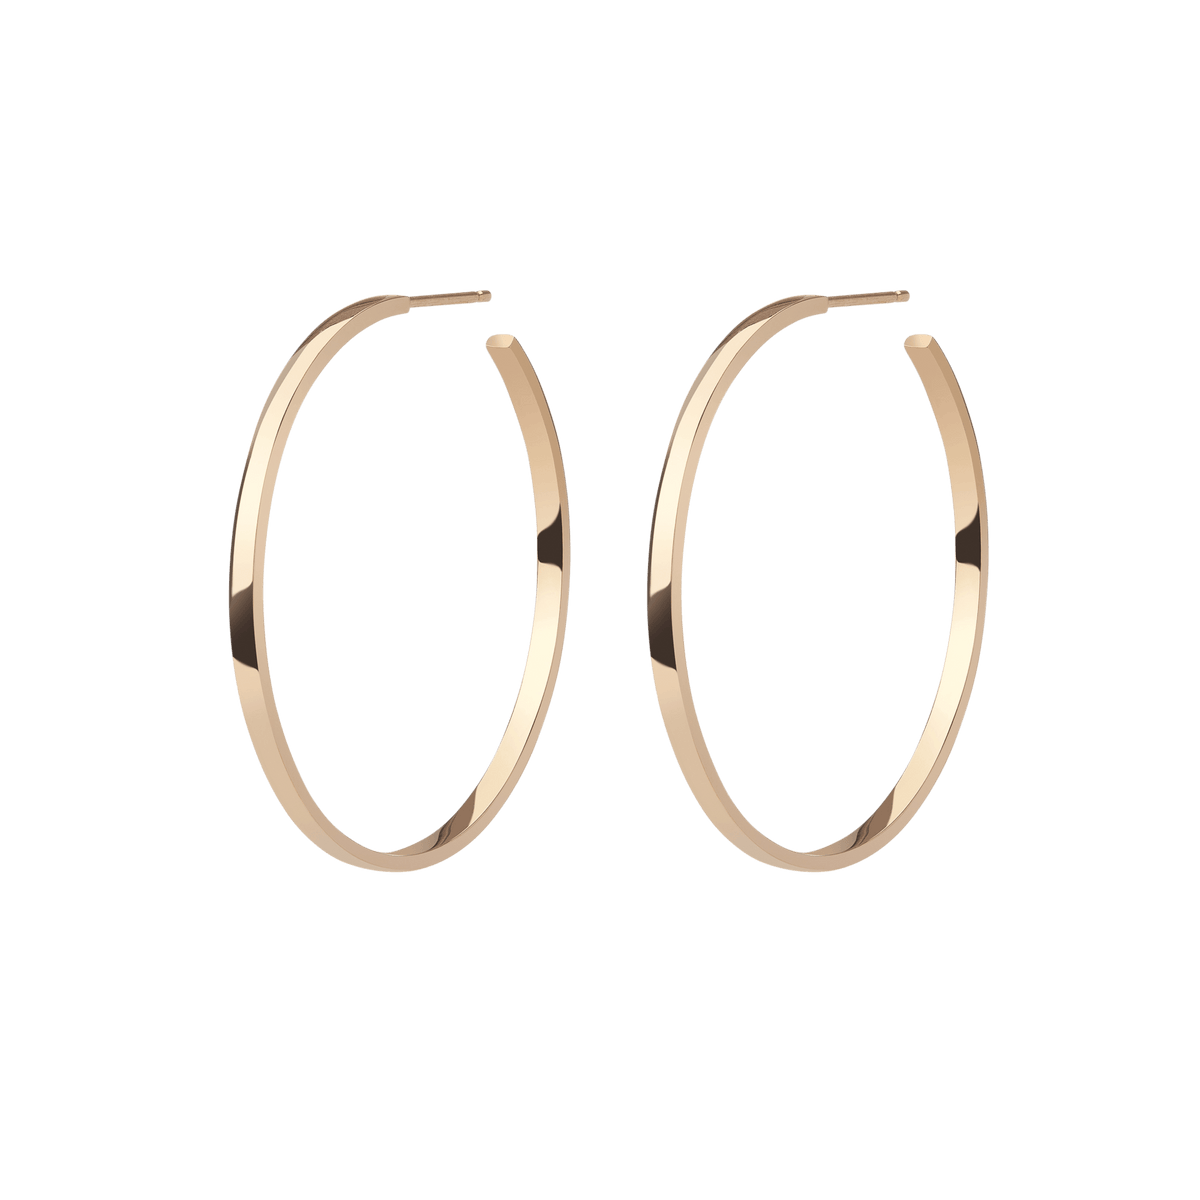 How to Put Hoop Earrings In: Tips and Advice